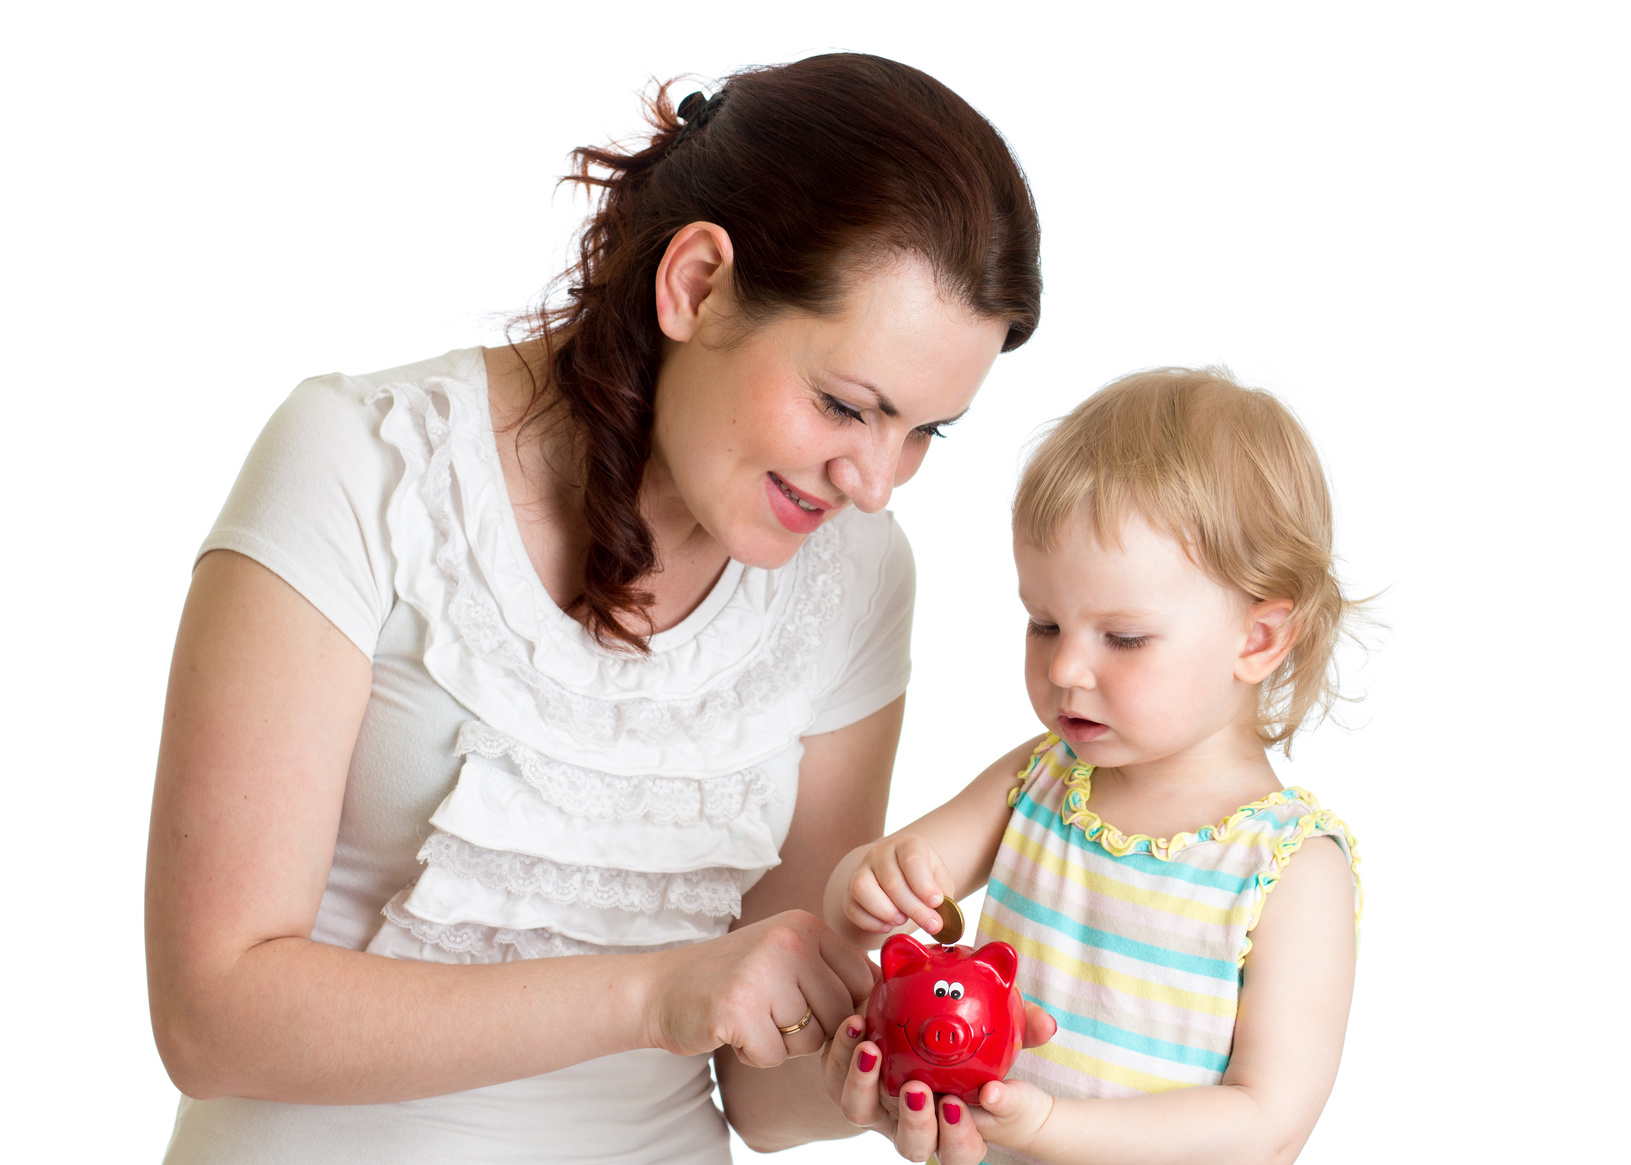 Tips and Tricks for Deciding a Child's Allowance Money